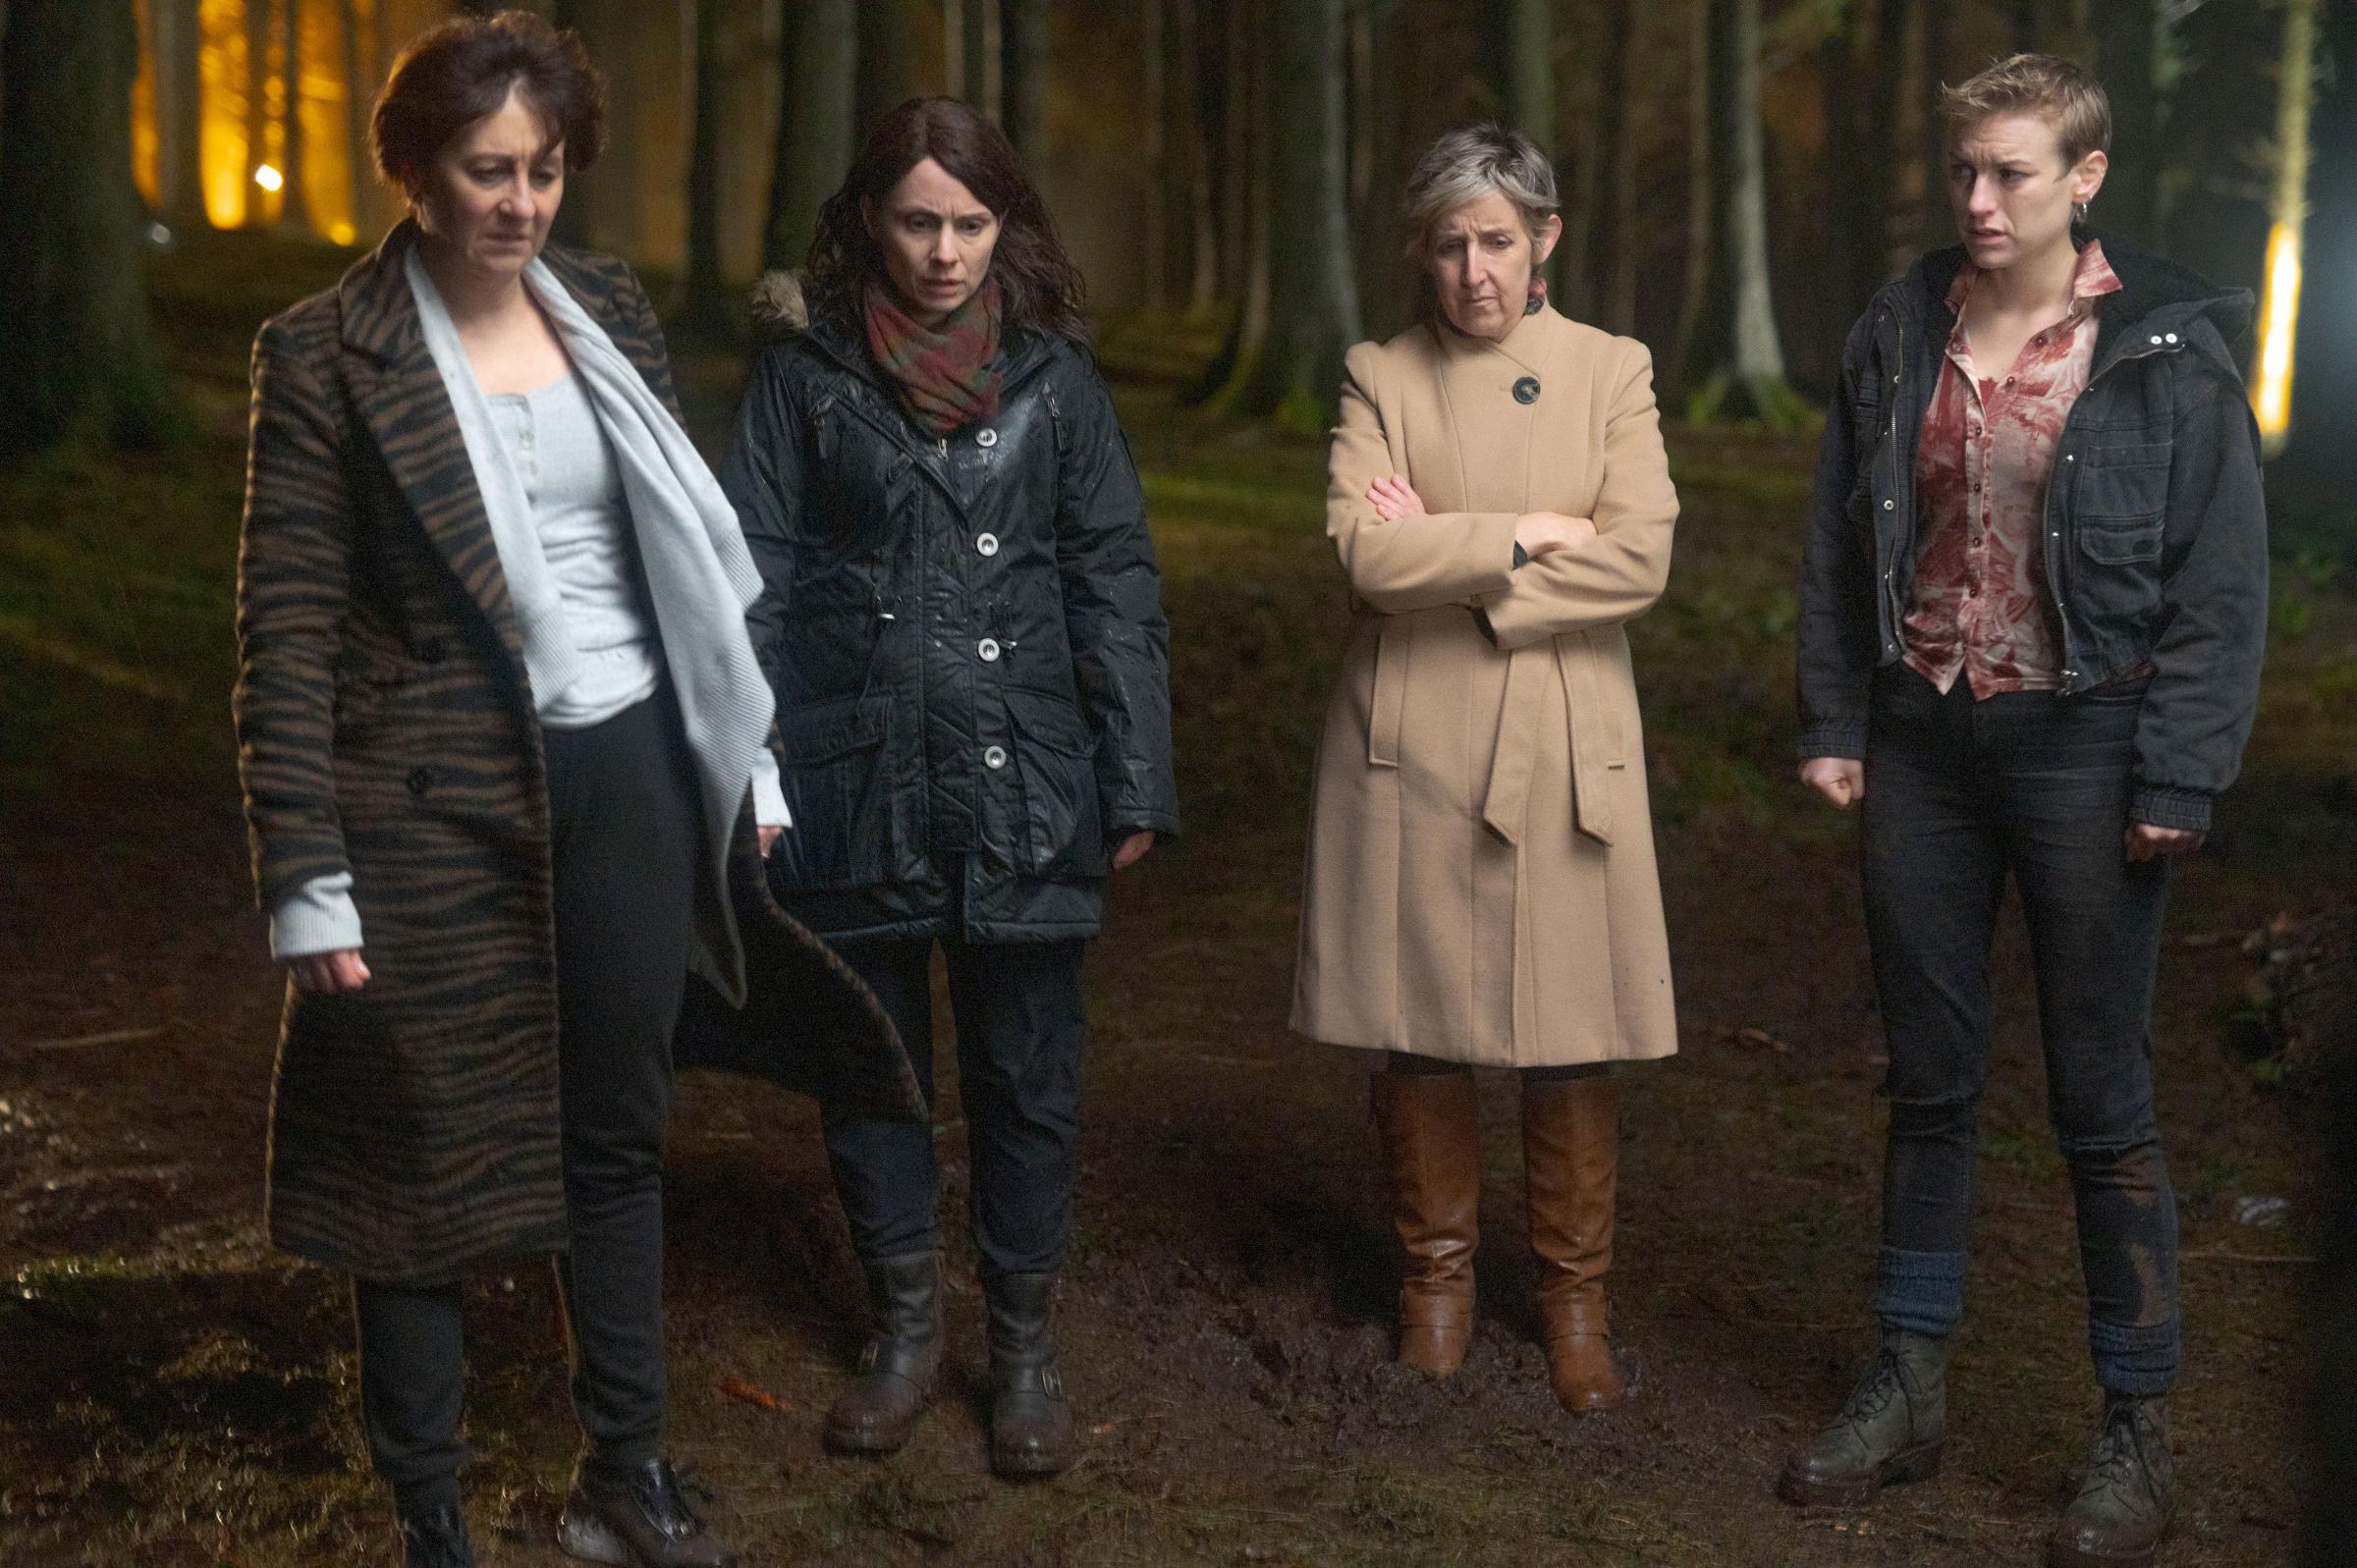 New series The Pact with, from left, Eiry Thomas, Laura Fraser, Julie Hesmondhalgh and Heledd Gwyn